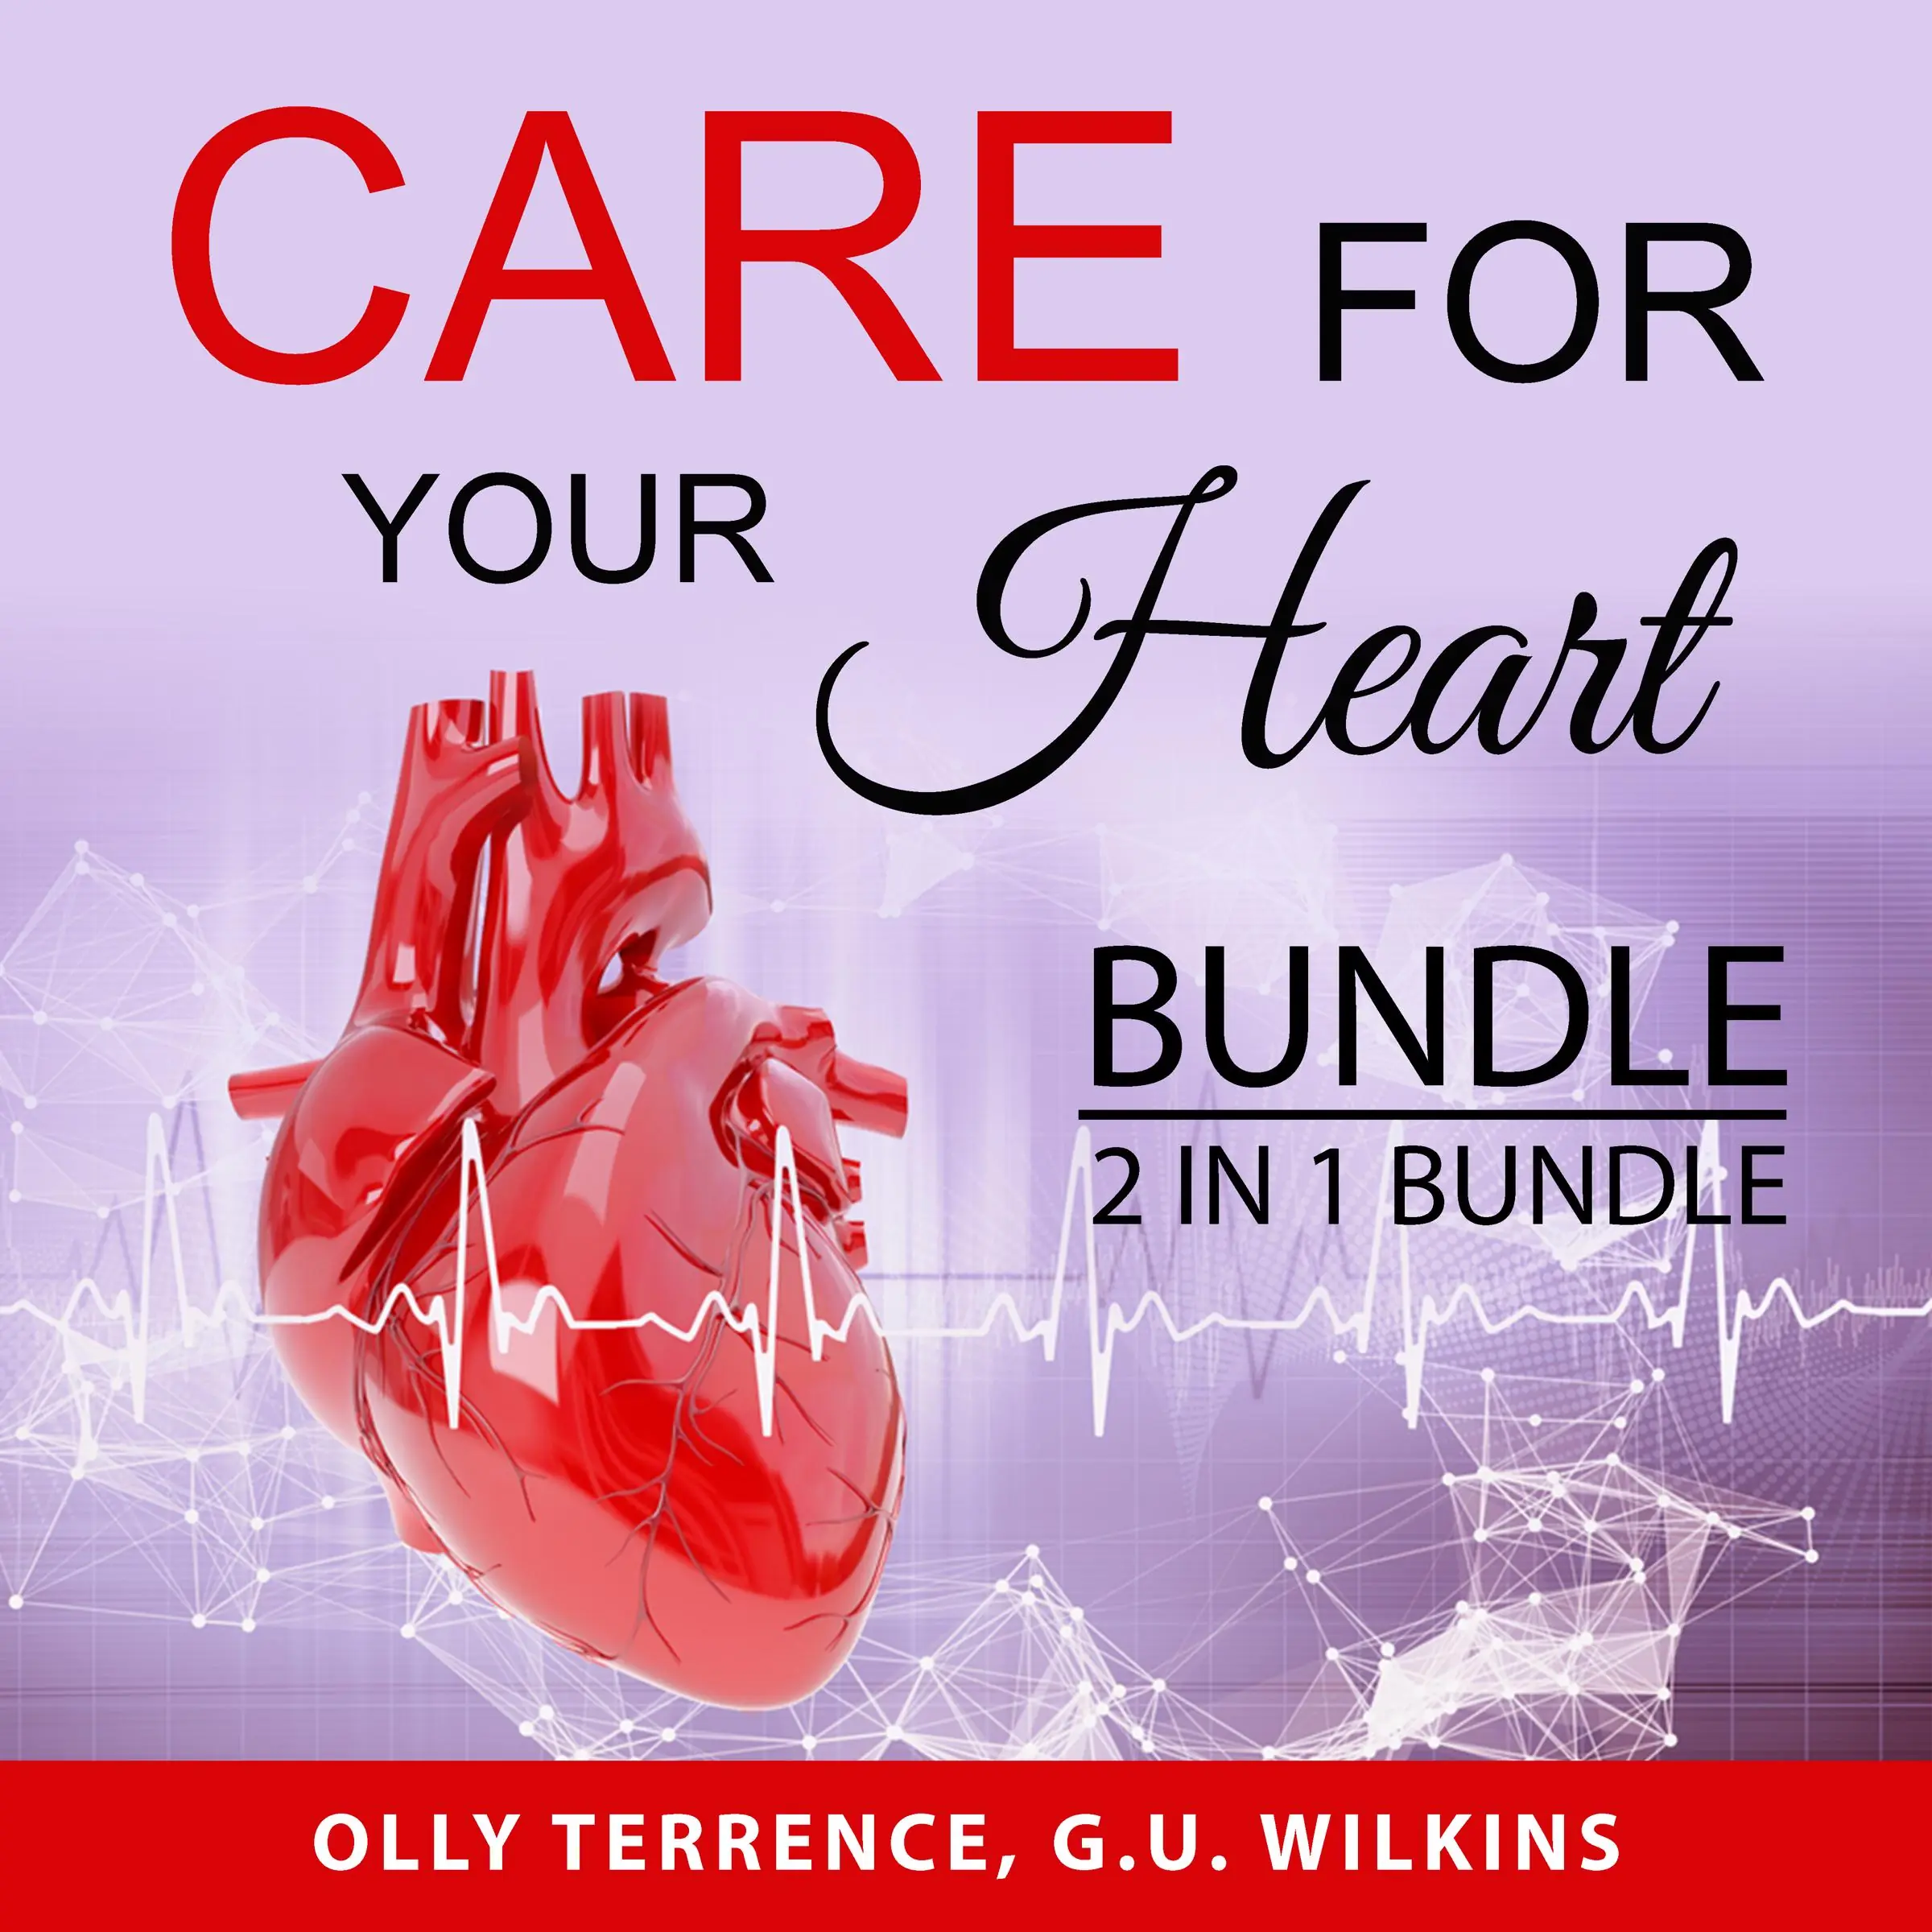 Care For Your Heart Bundle, 2 in 1 Bundle: Prevent Heart Disease and The Simple Heart Cure by and G.U. Wilkins Audiobook